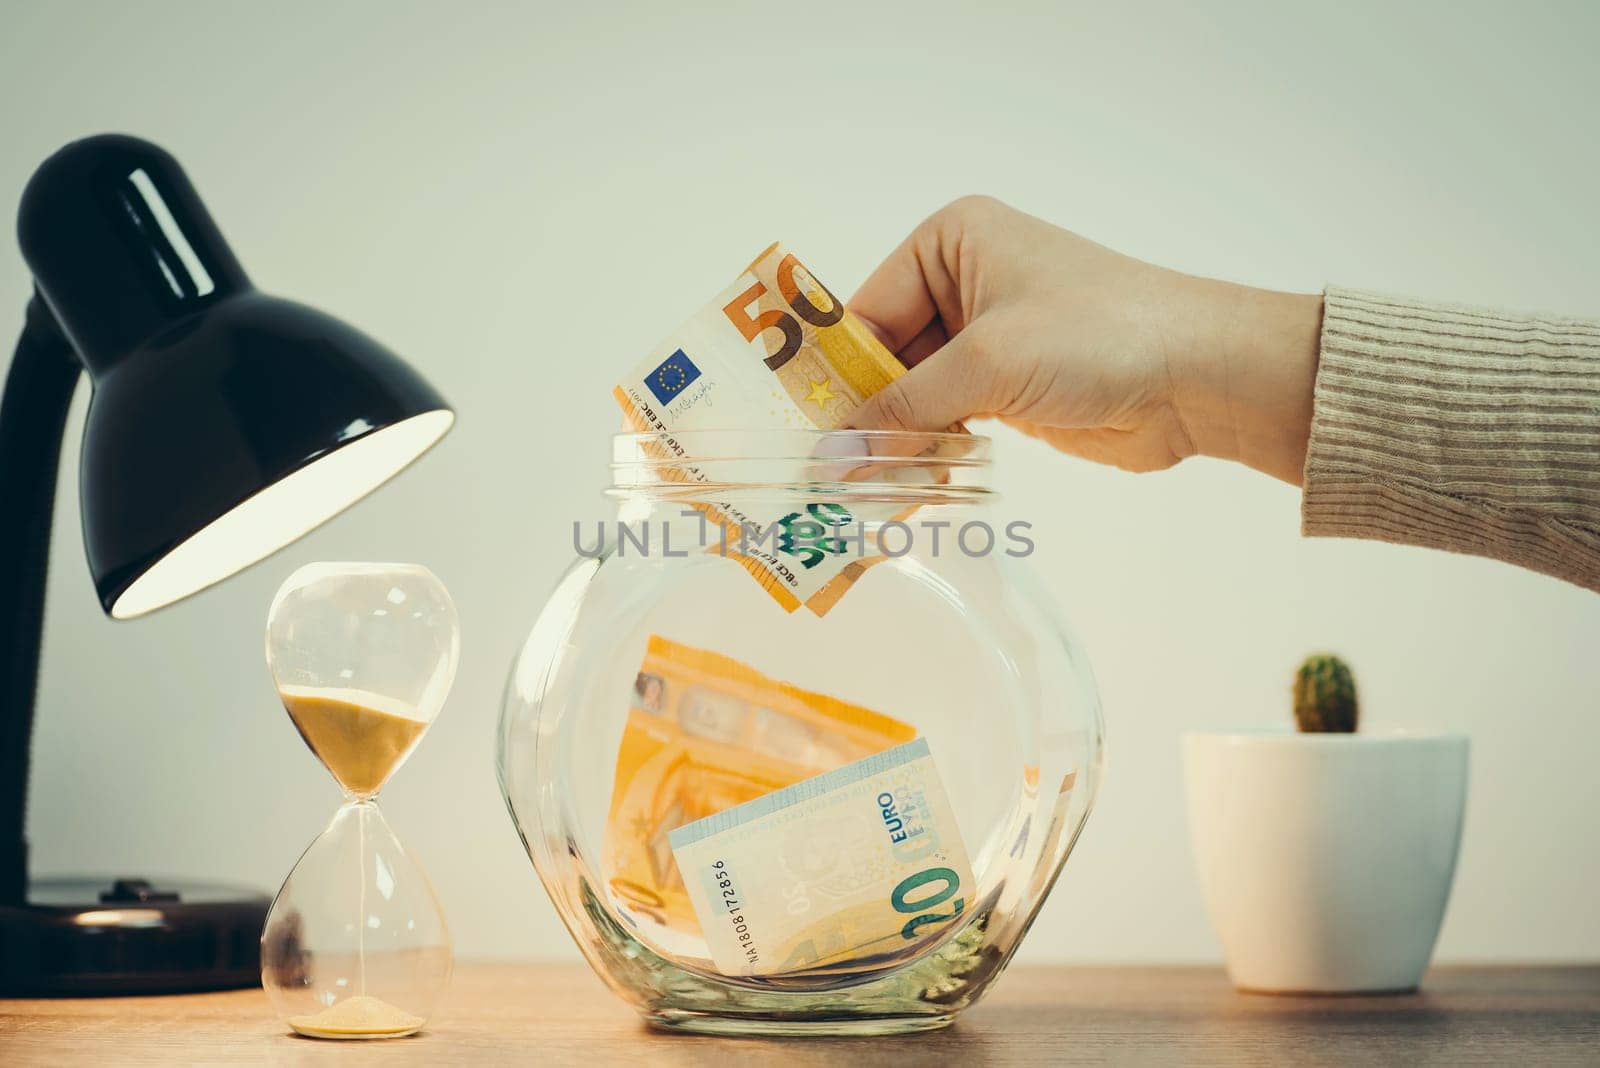 Collecting savings from income concept, toned image by VitaliiPetrushenko